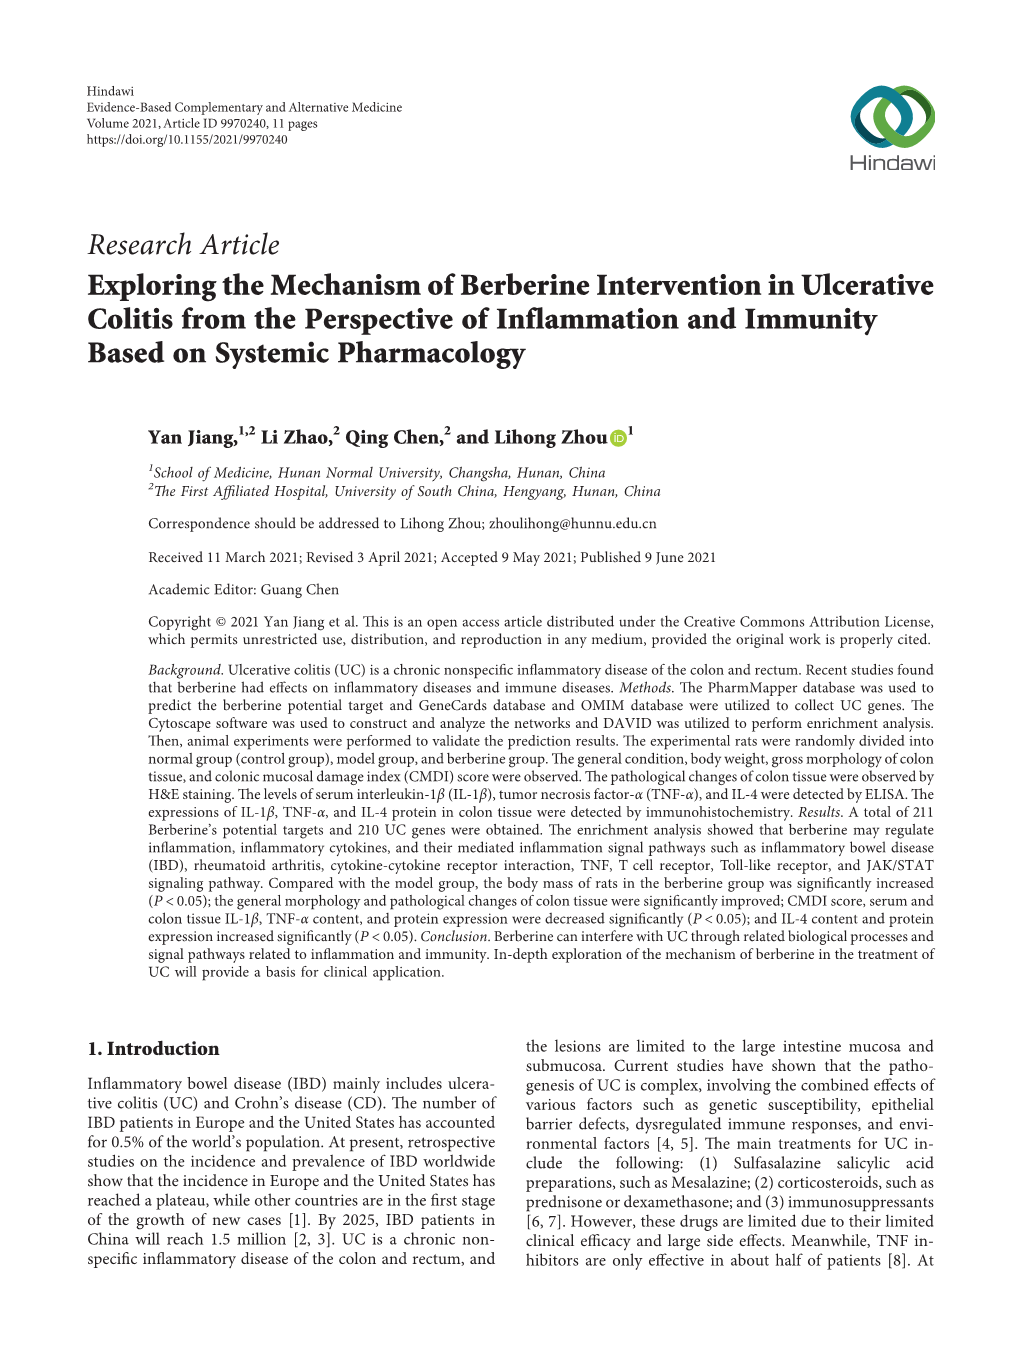 Exploring the Mechanism of Berberine Intervention in Ulcerative Colitis from the Perspective of Inflammation and Immunity Based on Systemic Pharmacology